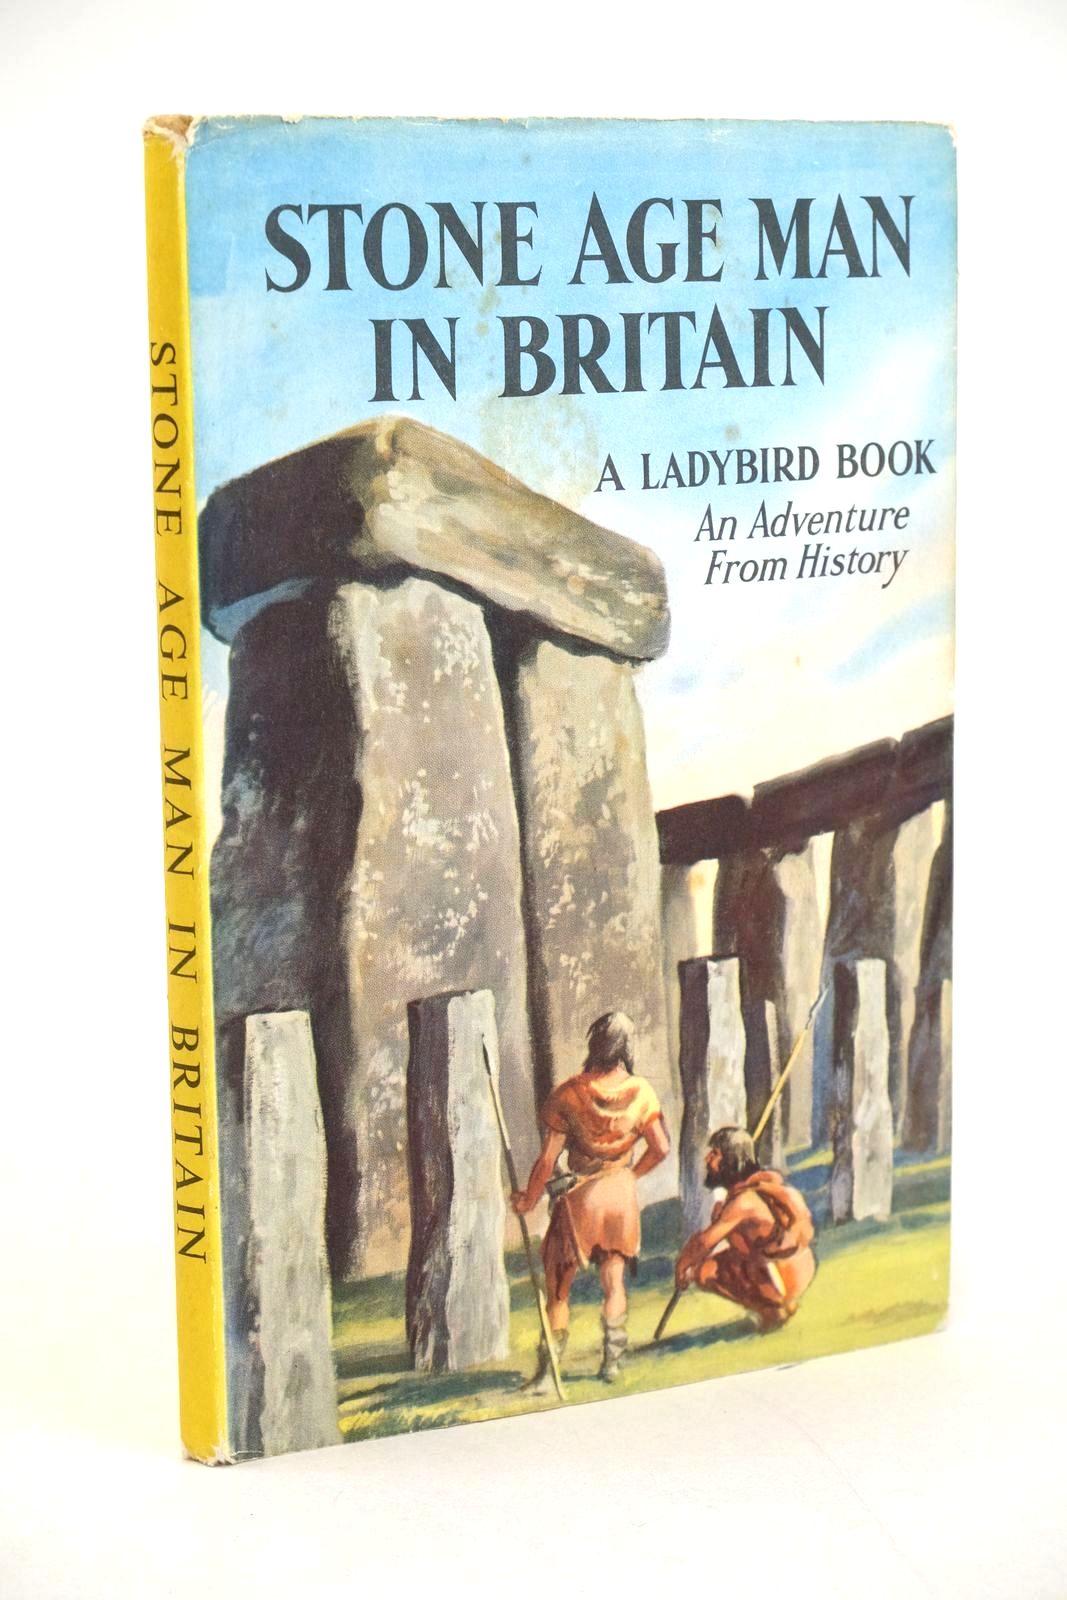 Photo of STONE AGE MAN IN BRITAIN written by Peach, L. Du Garde illustrated by Kenney, John published by Wills &amp; Hepworth Ltd. (STOCK CODE: 1327743)  for sale by Stella & Rose's Books